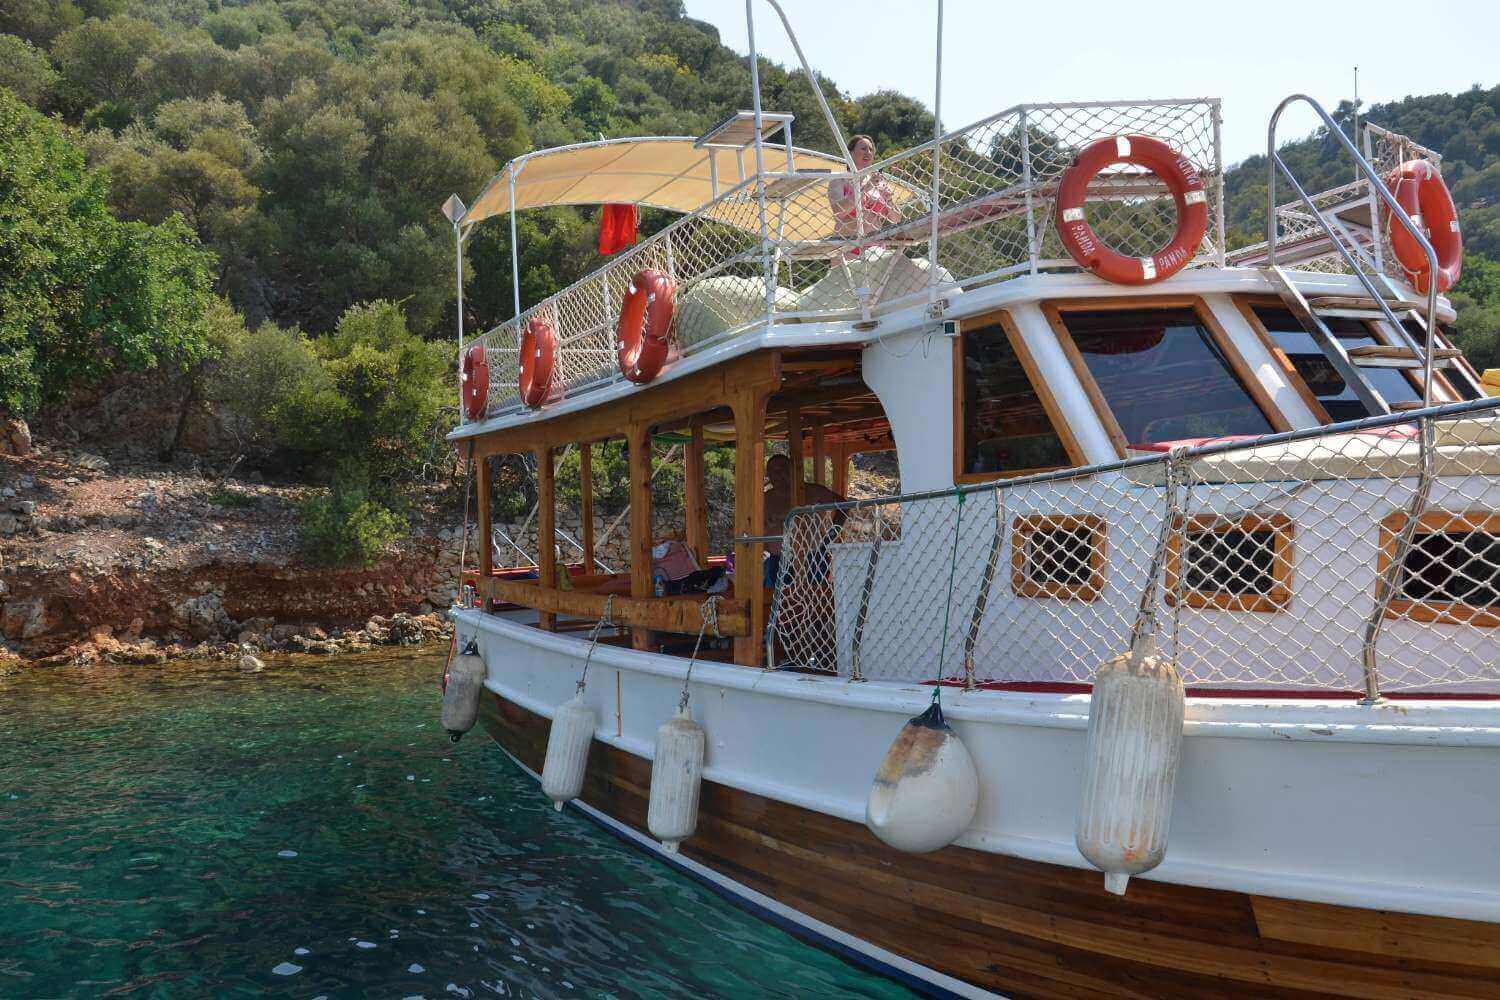 Hire a Boat with Crew, BBQ and return Transfer is included . Dalaman, Gocek, Sarigerme, Dalyan